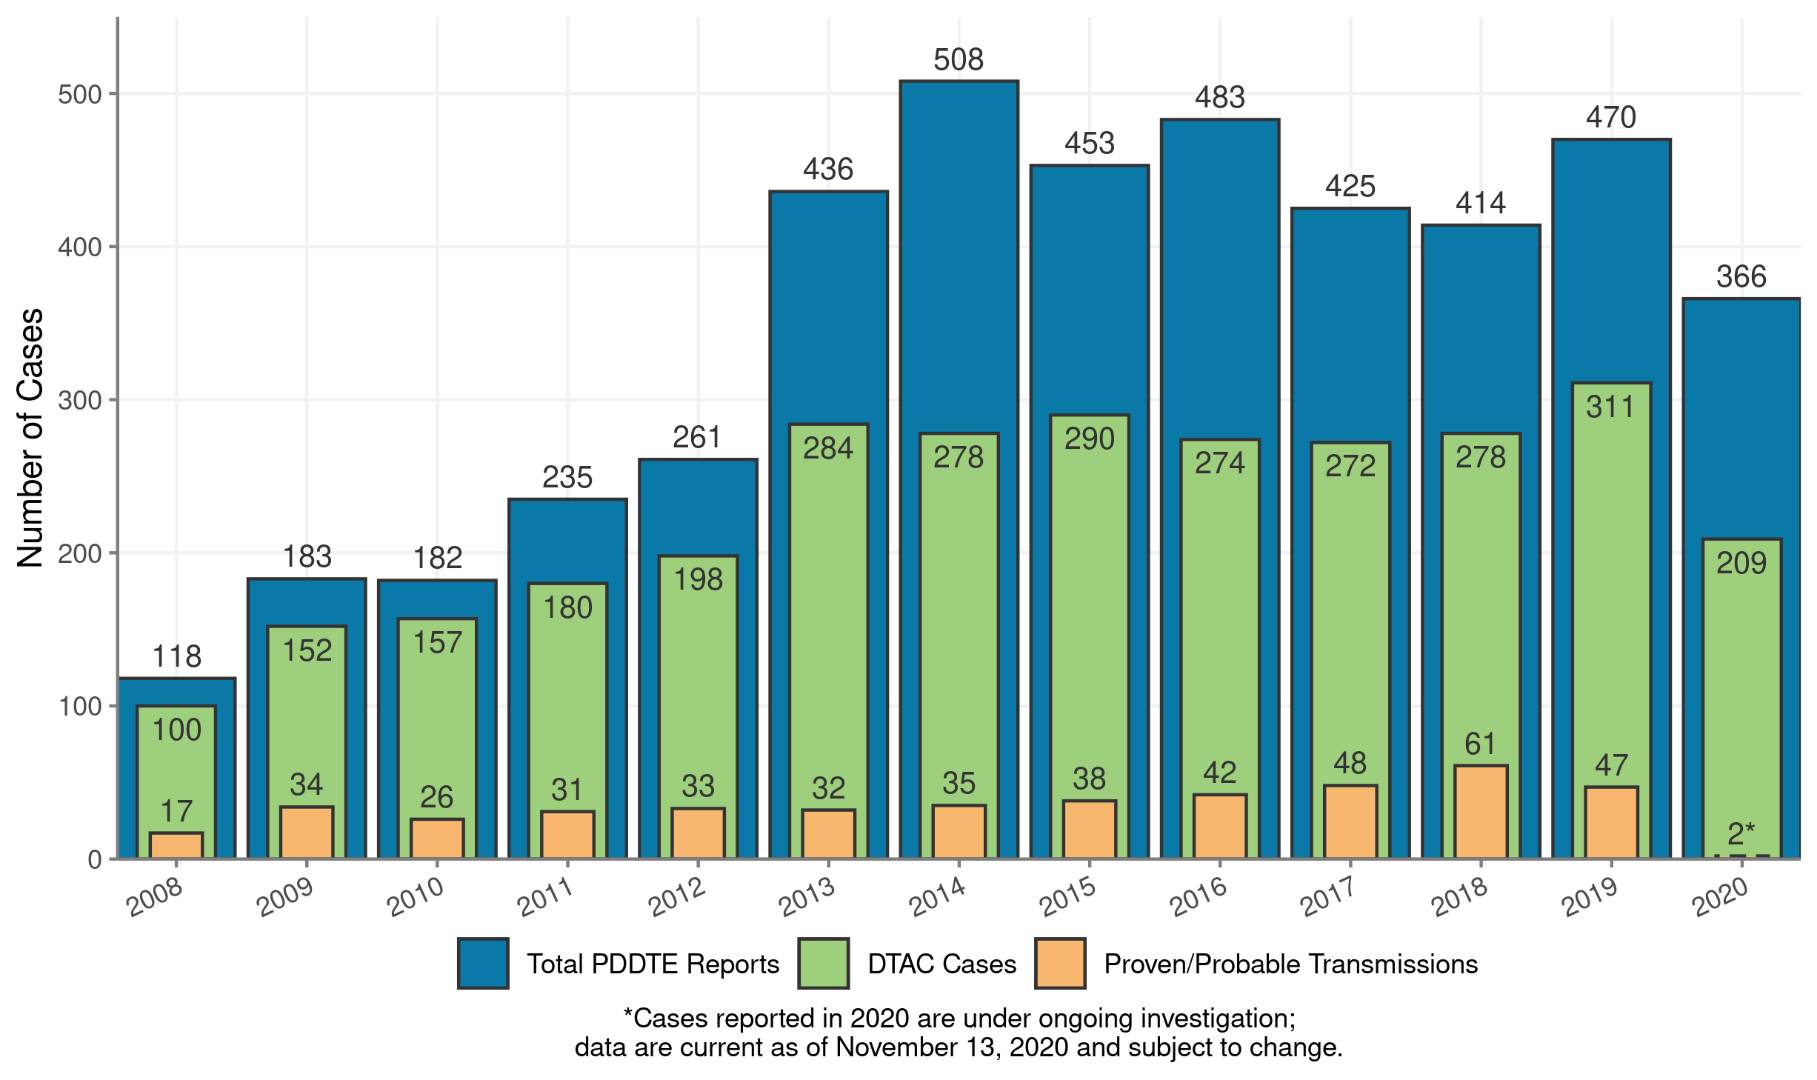 Number of cases. Total PDDTE reports, DTAC cases, and proven or probable transmissions.